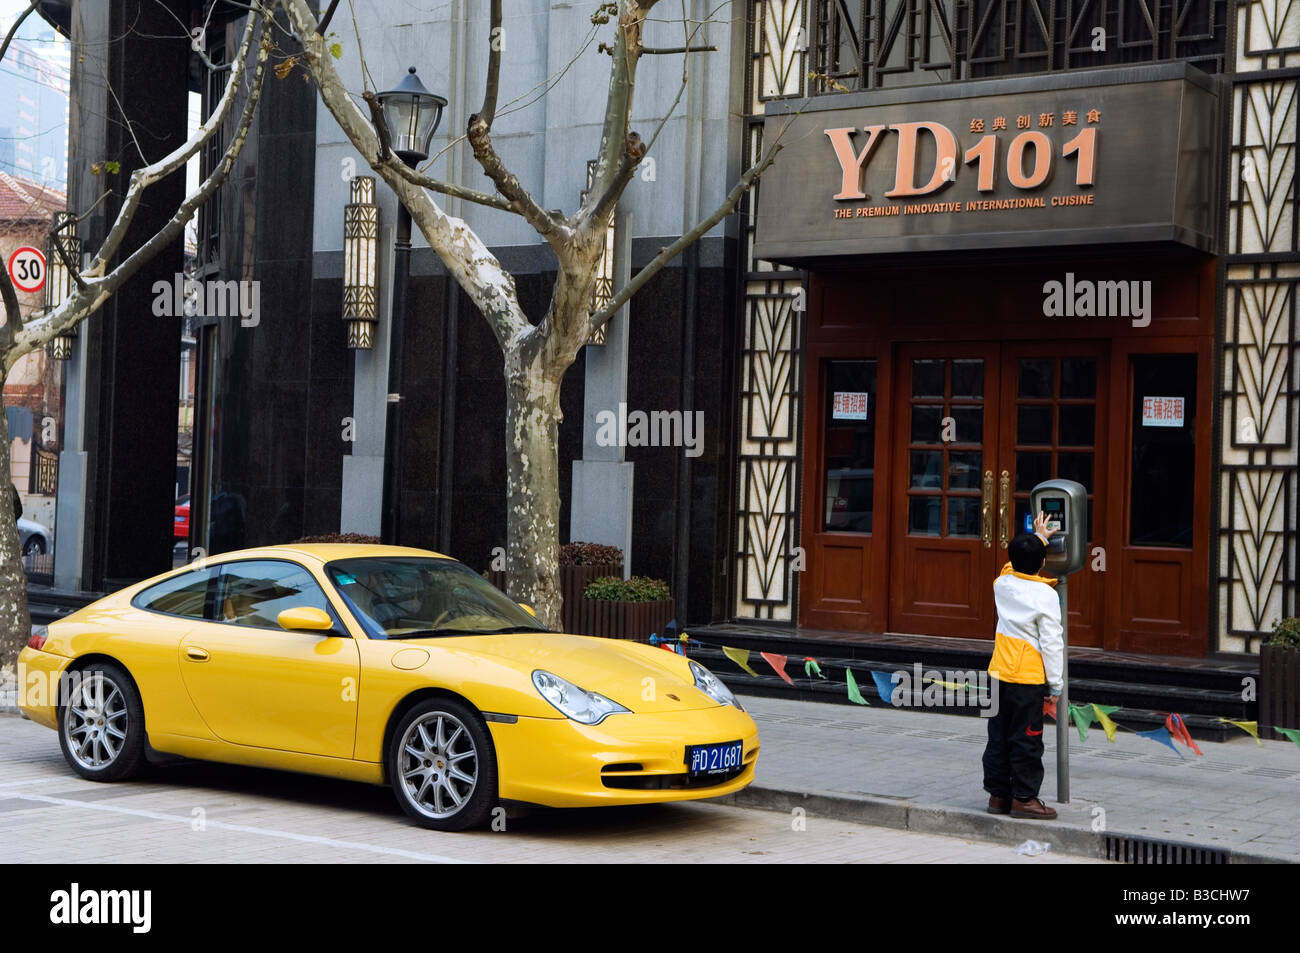 China, Shanghai. French Concession area - a young boy putting coins in the parking meter next to a yellow Porshe. Stock Photo